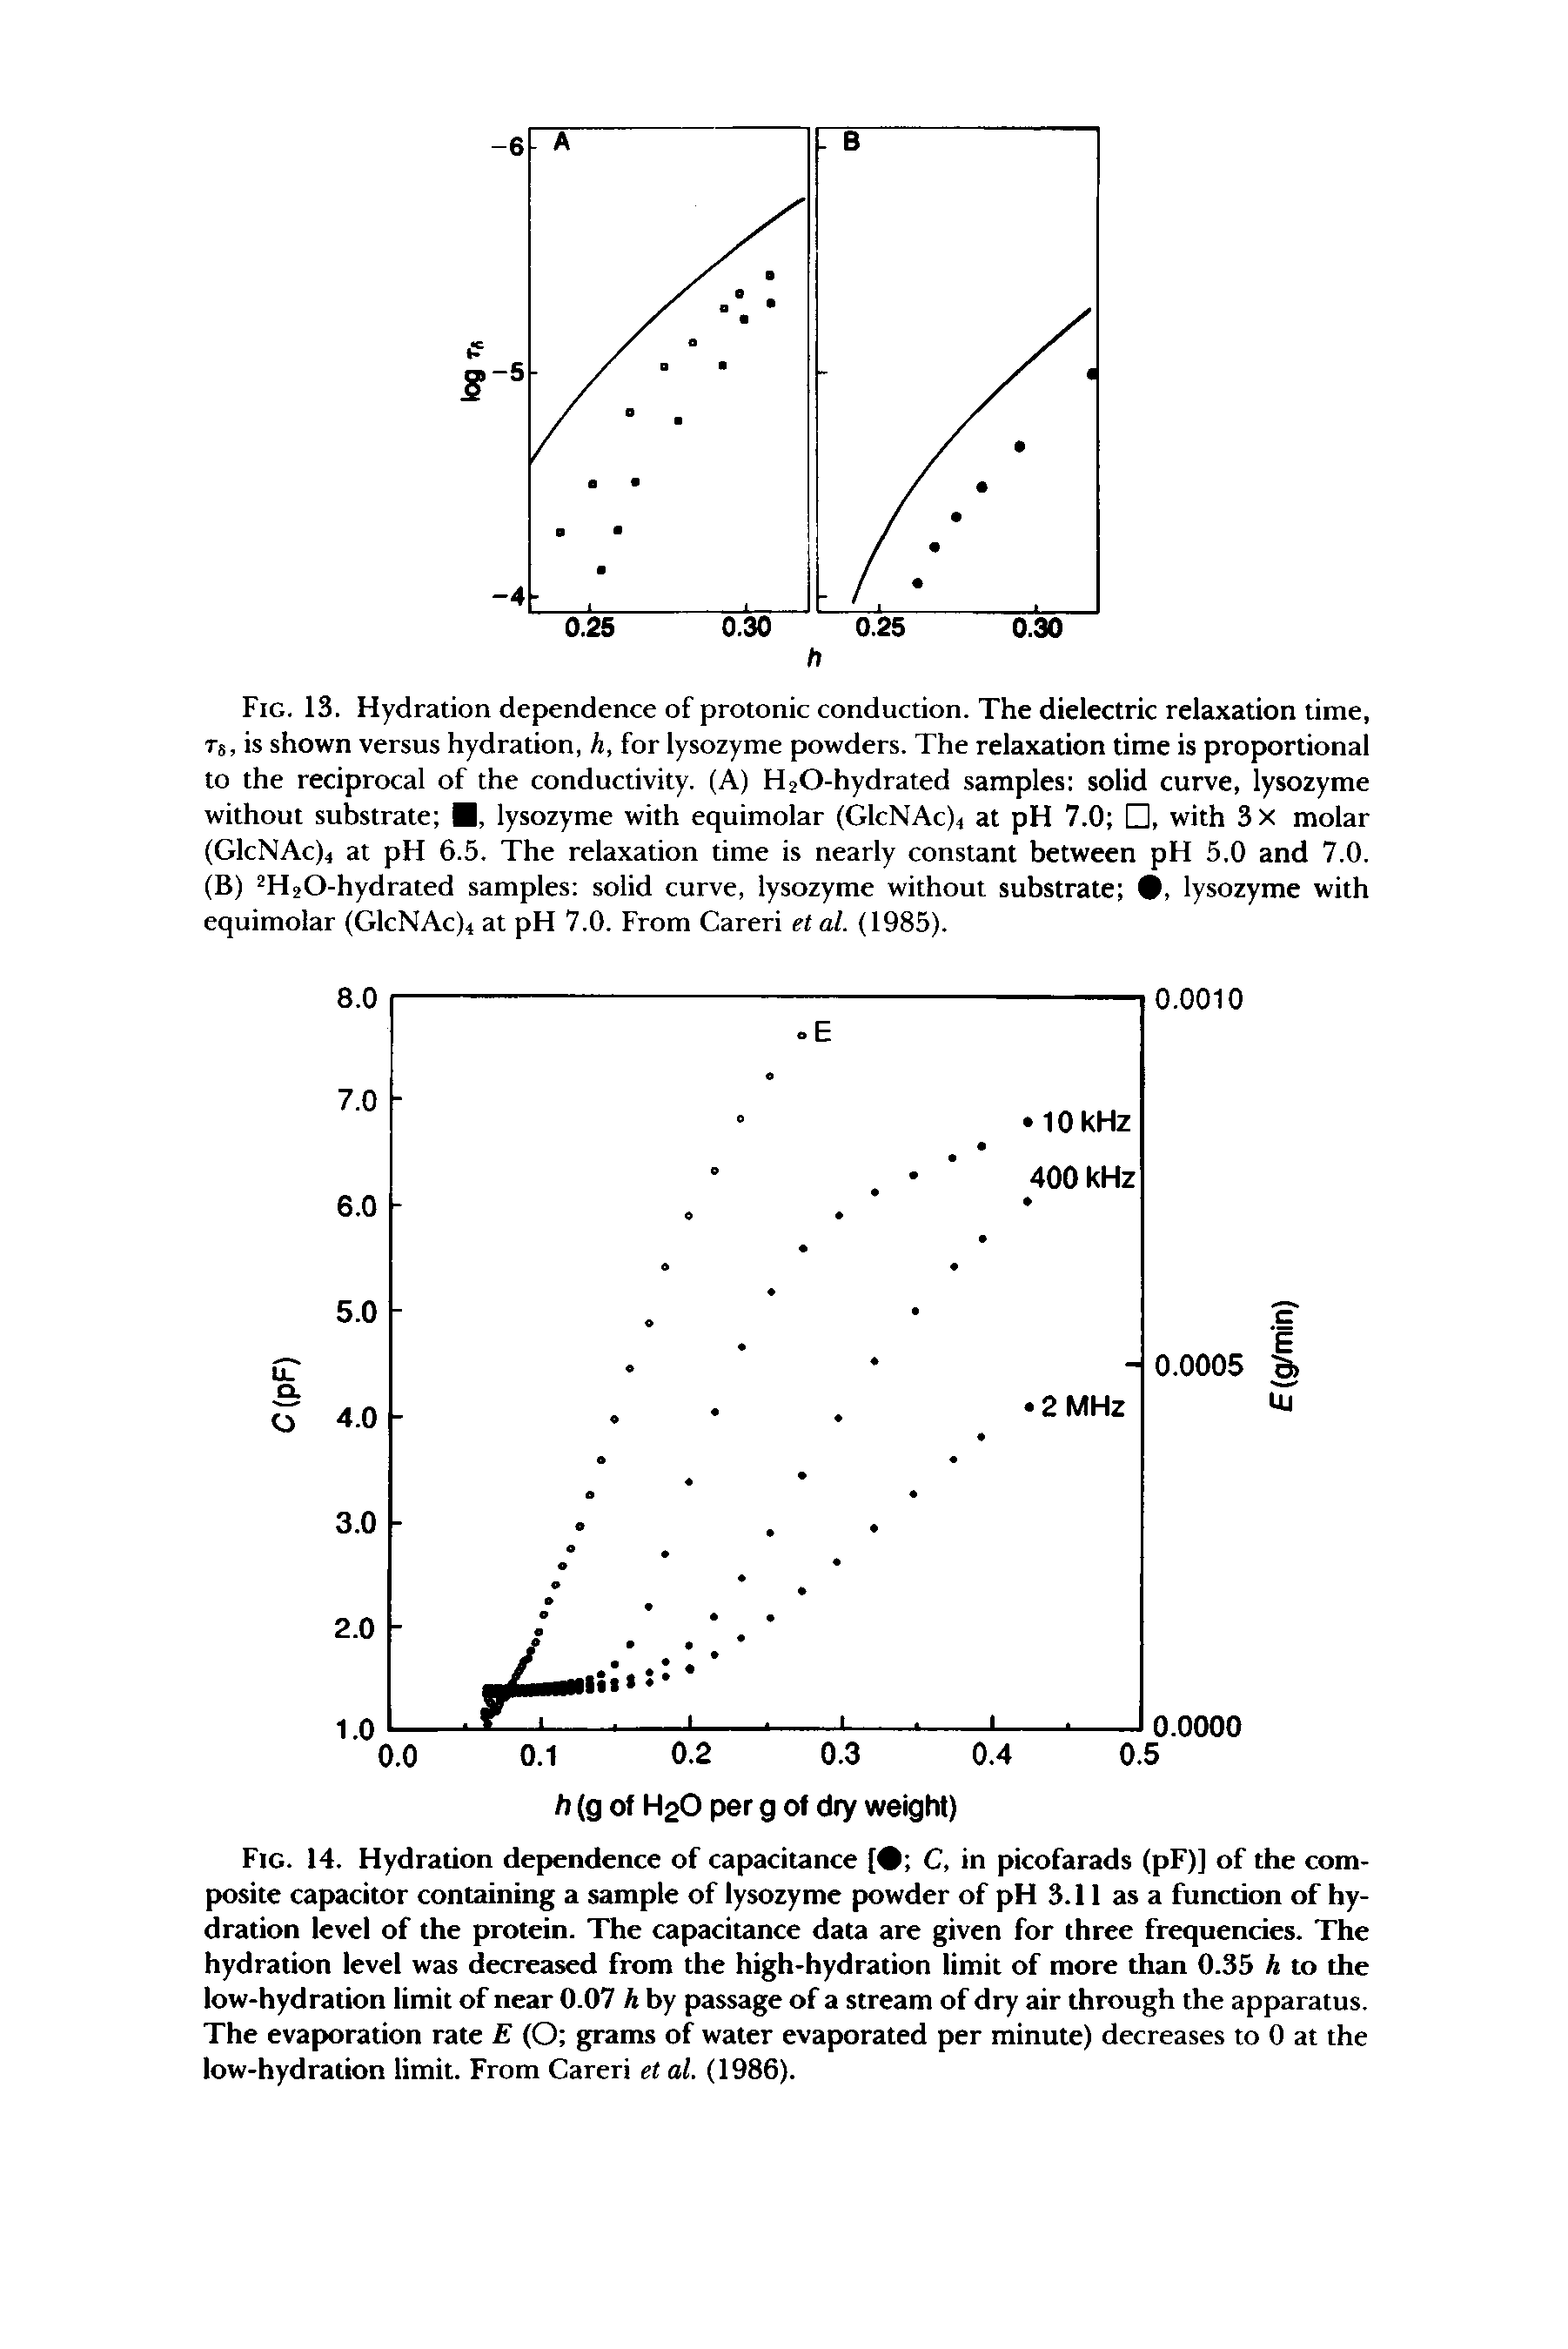 Fig. 14. Hydration dependence of capacitance [9 C, in picofarads (pF)] of the composite capacitor containing a sample of lysozyme powder of pH 3.11 as a function of hydration level of the protein. The capacitance data are given for three frequencies. The hydration level was decreased from the high-hydration limit of more than 0.35 h to the low-hydration limit of near 0.07 h by passage of a stream of dry air through the apparatus. The evaporation rate E (O grams of water evaporated per minute) decreases to 0 at the low-hydration limit. From Careri et al. (1986).